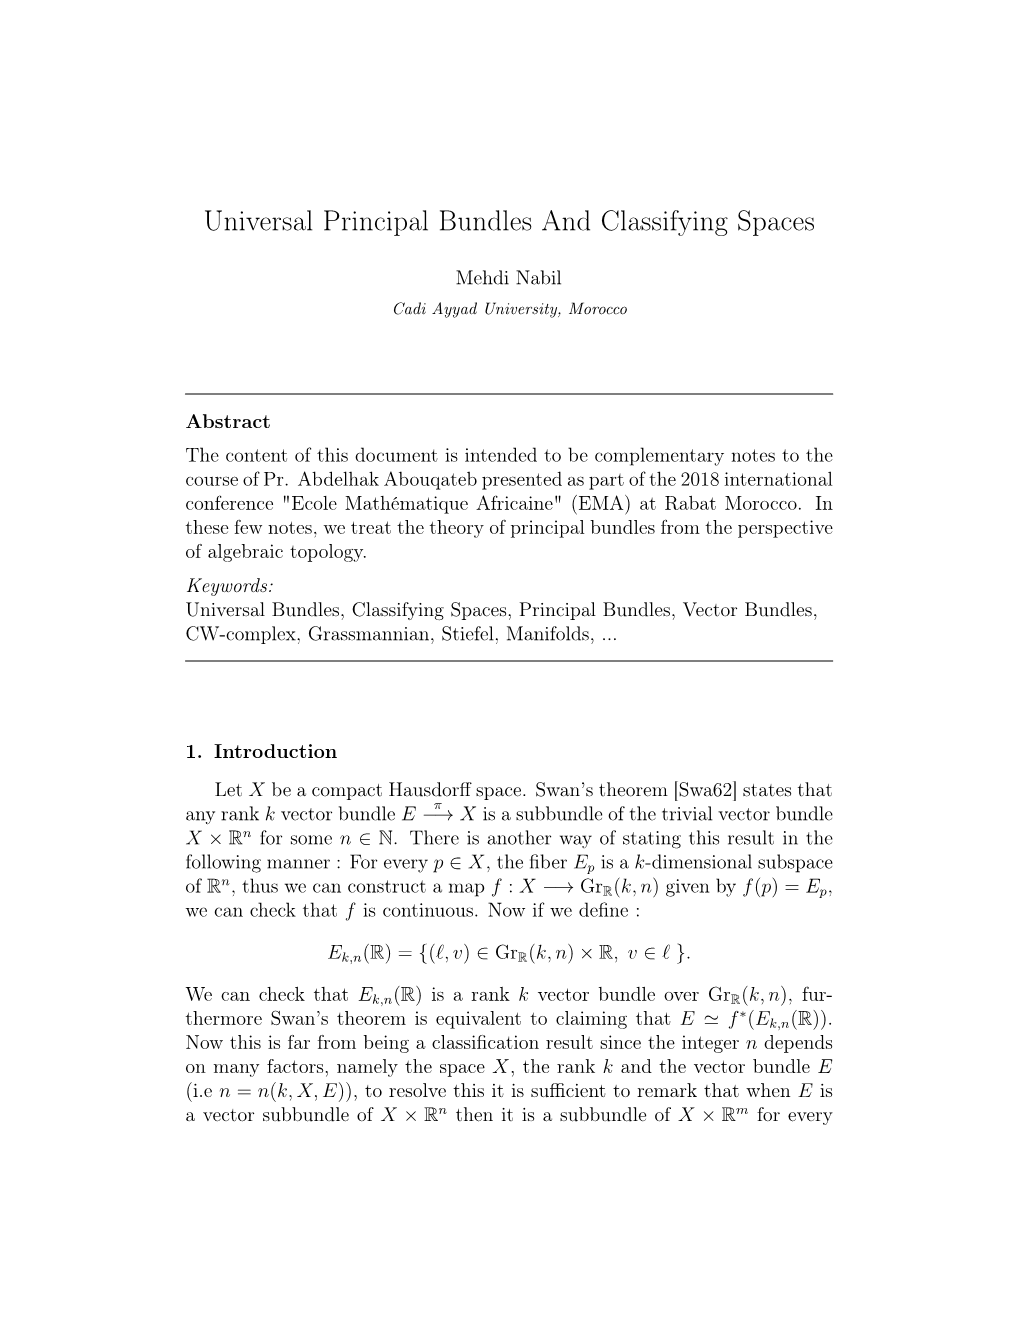 Universal Principal Bundles and Classifying Spaces